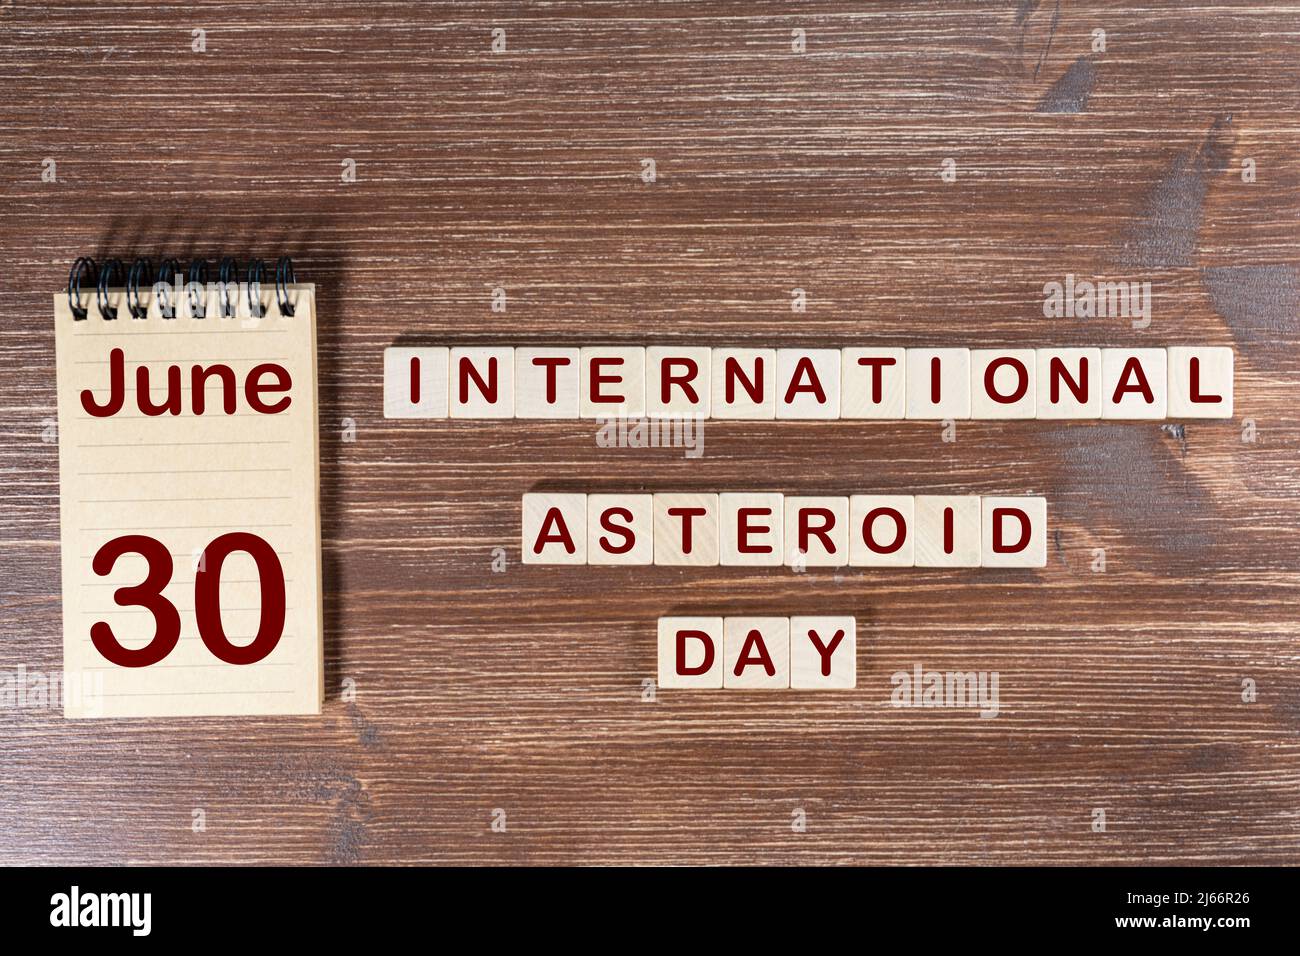 The celebration of the International Asteroid Day the June 30 Stock Photo